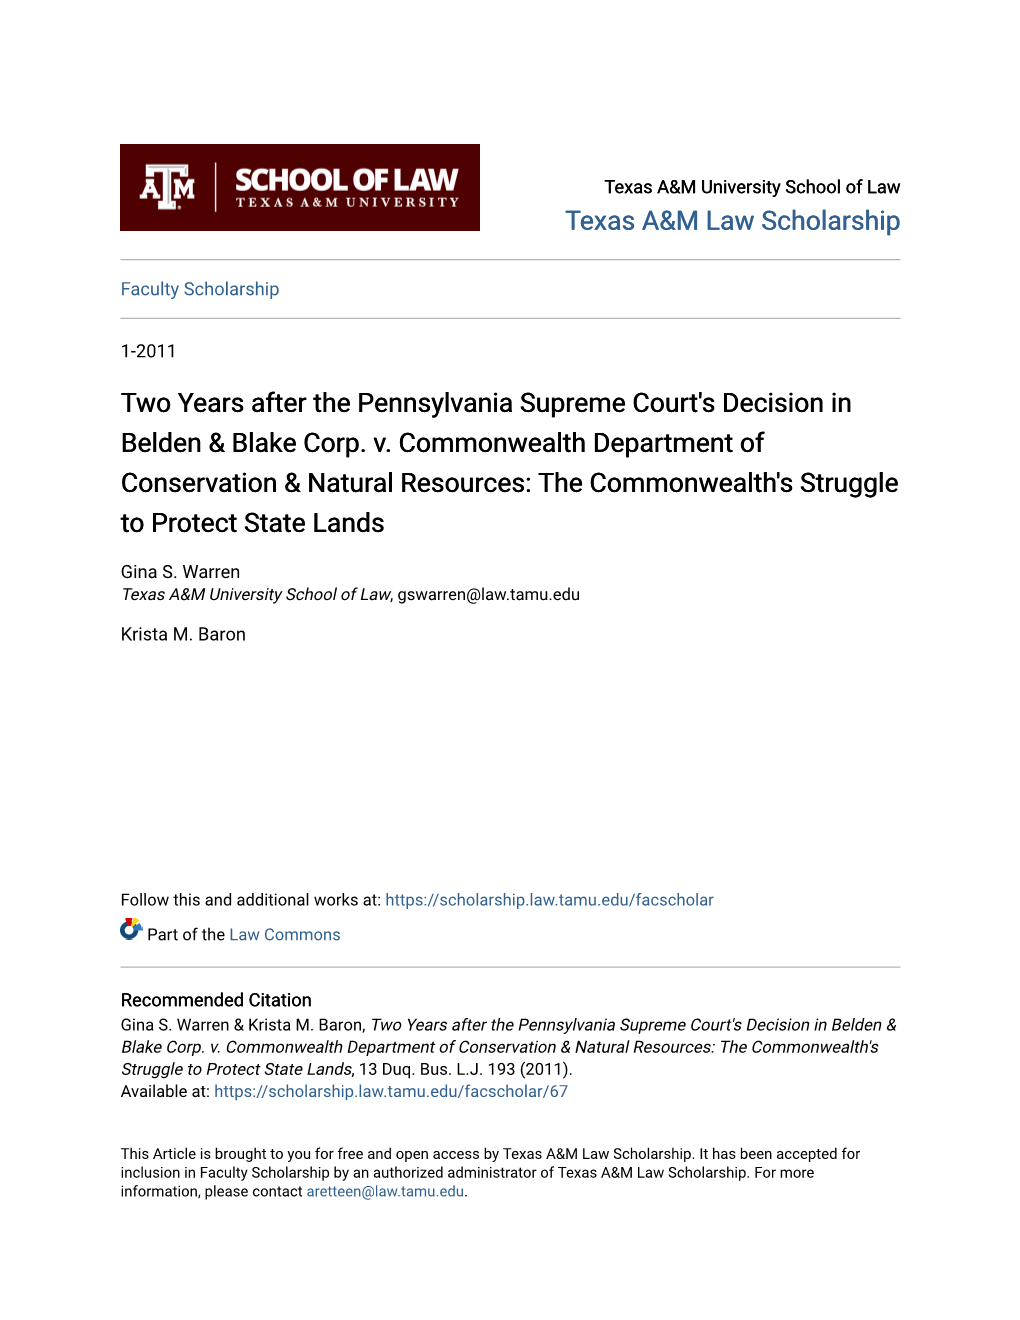 Two Years After the Pennsylvania Supreme Court's Decision in Belden & Blake Corp. V. Commonwealth Department of Conserva